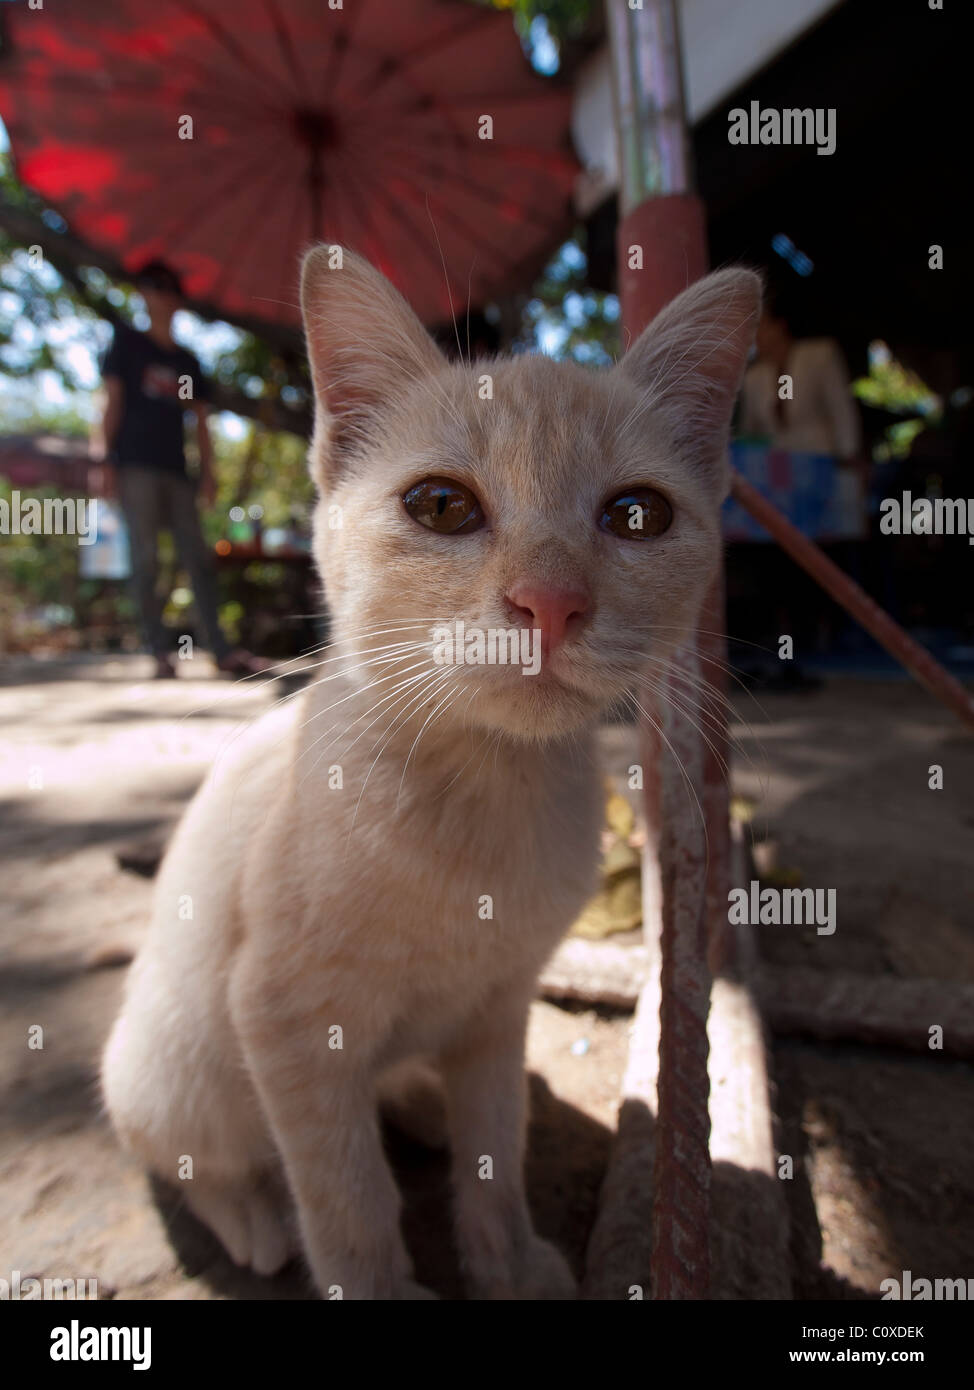 A stray cat looking lost in a temple Stock Photo